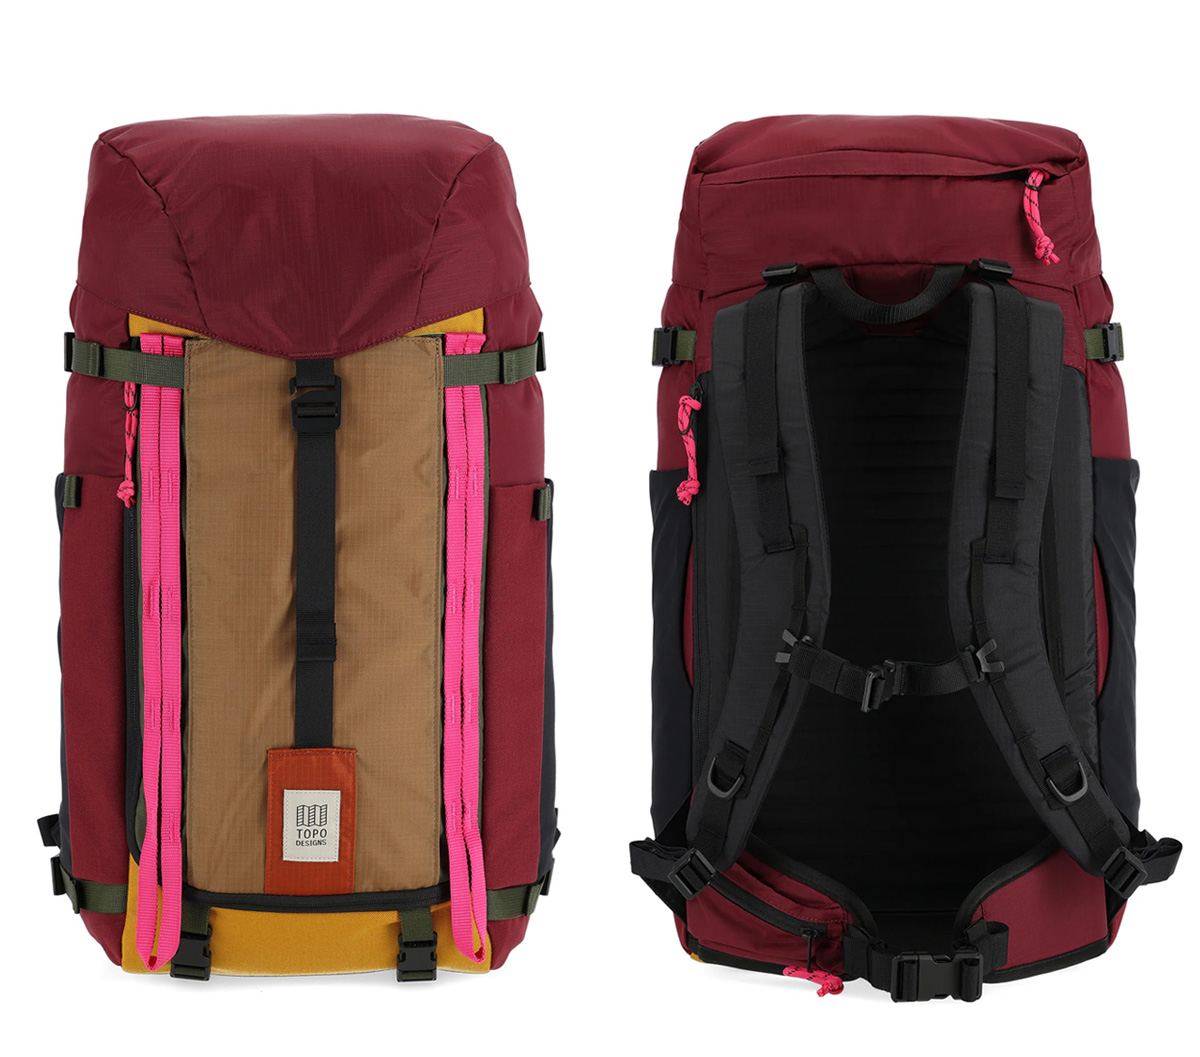 Topo Designs Mountain Pack 28L Burgundy/Dark Khaki, front and back